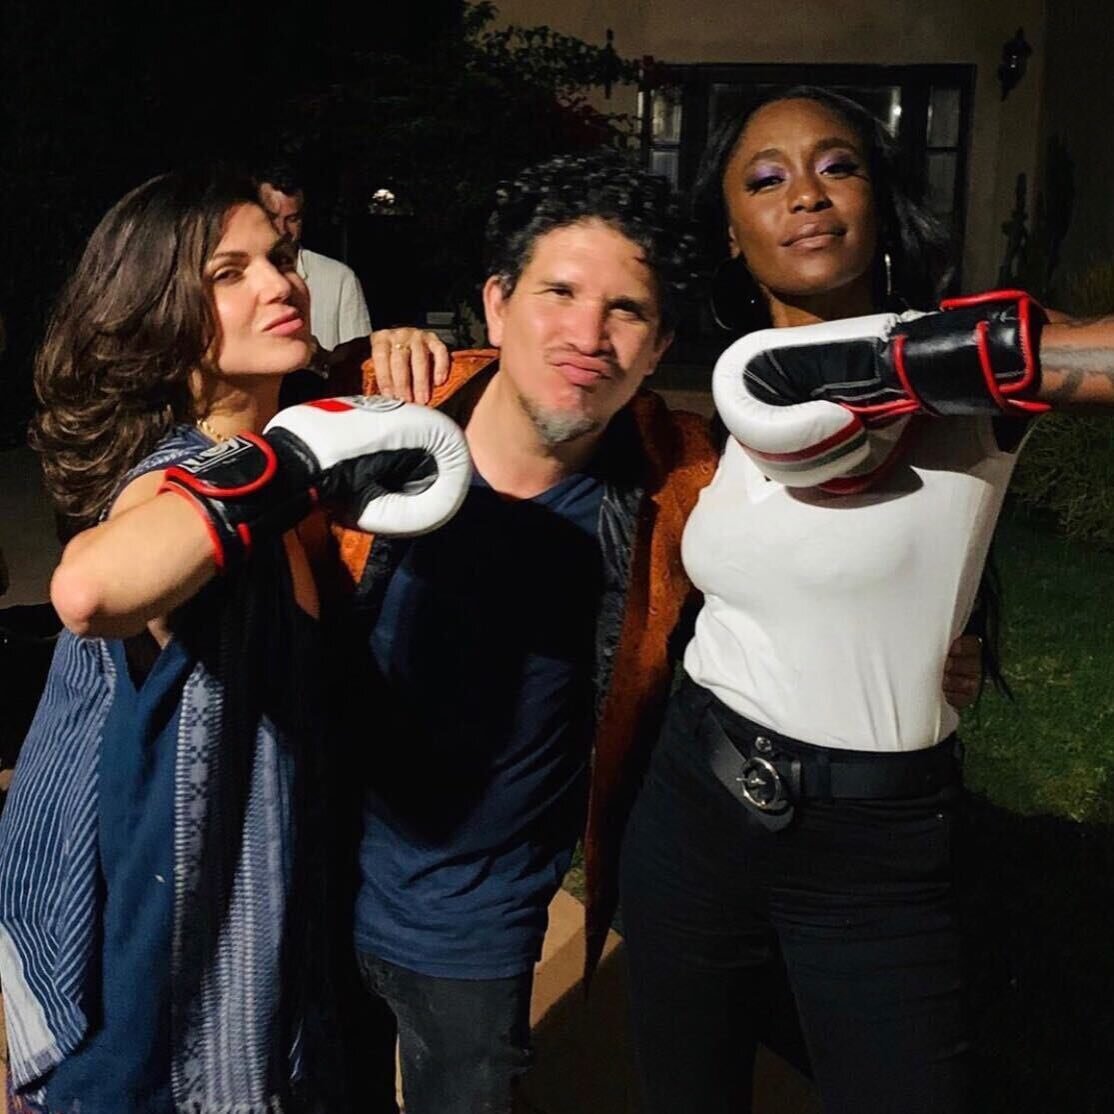 Unfair fight for @robgarzamusic🥊 with double trouble! @lanaparrilla and Magnetic Moon artist, @racqueljones
.
.
.
.
 #magneticmoon #garza #lanaparrilla #racqueljones #newpost #friendship